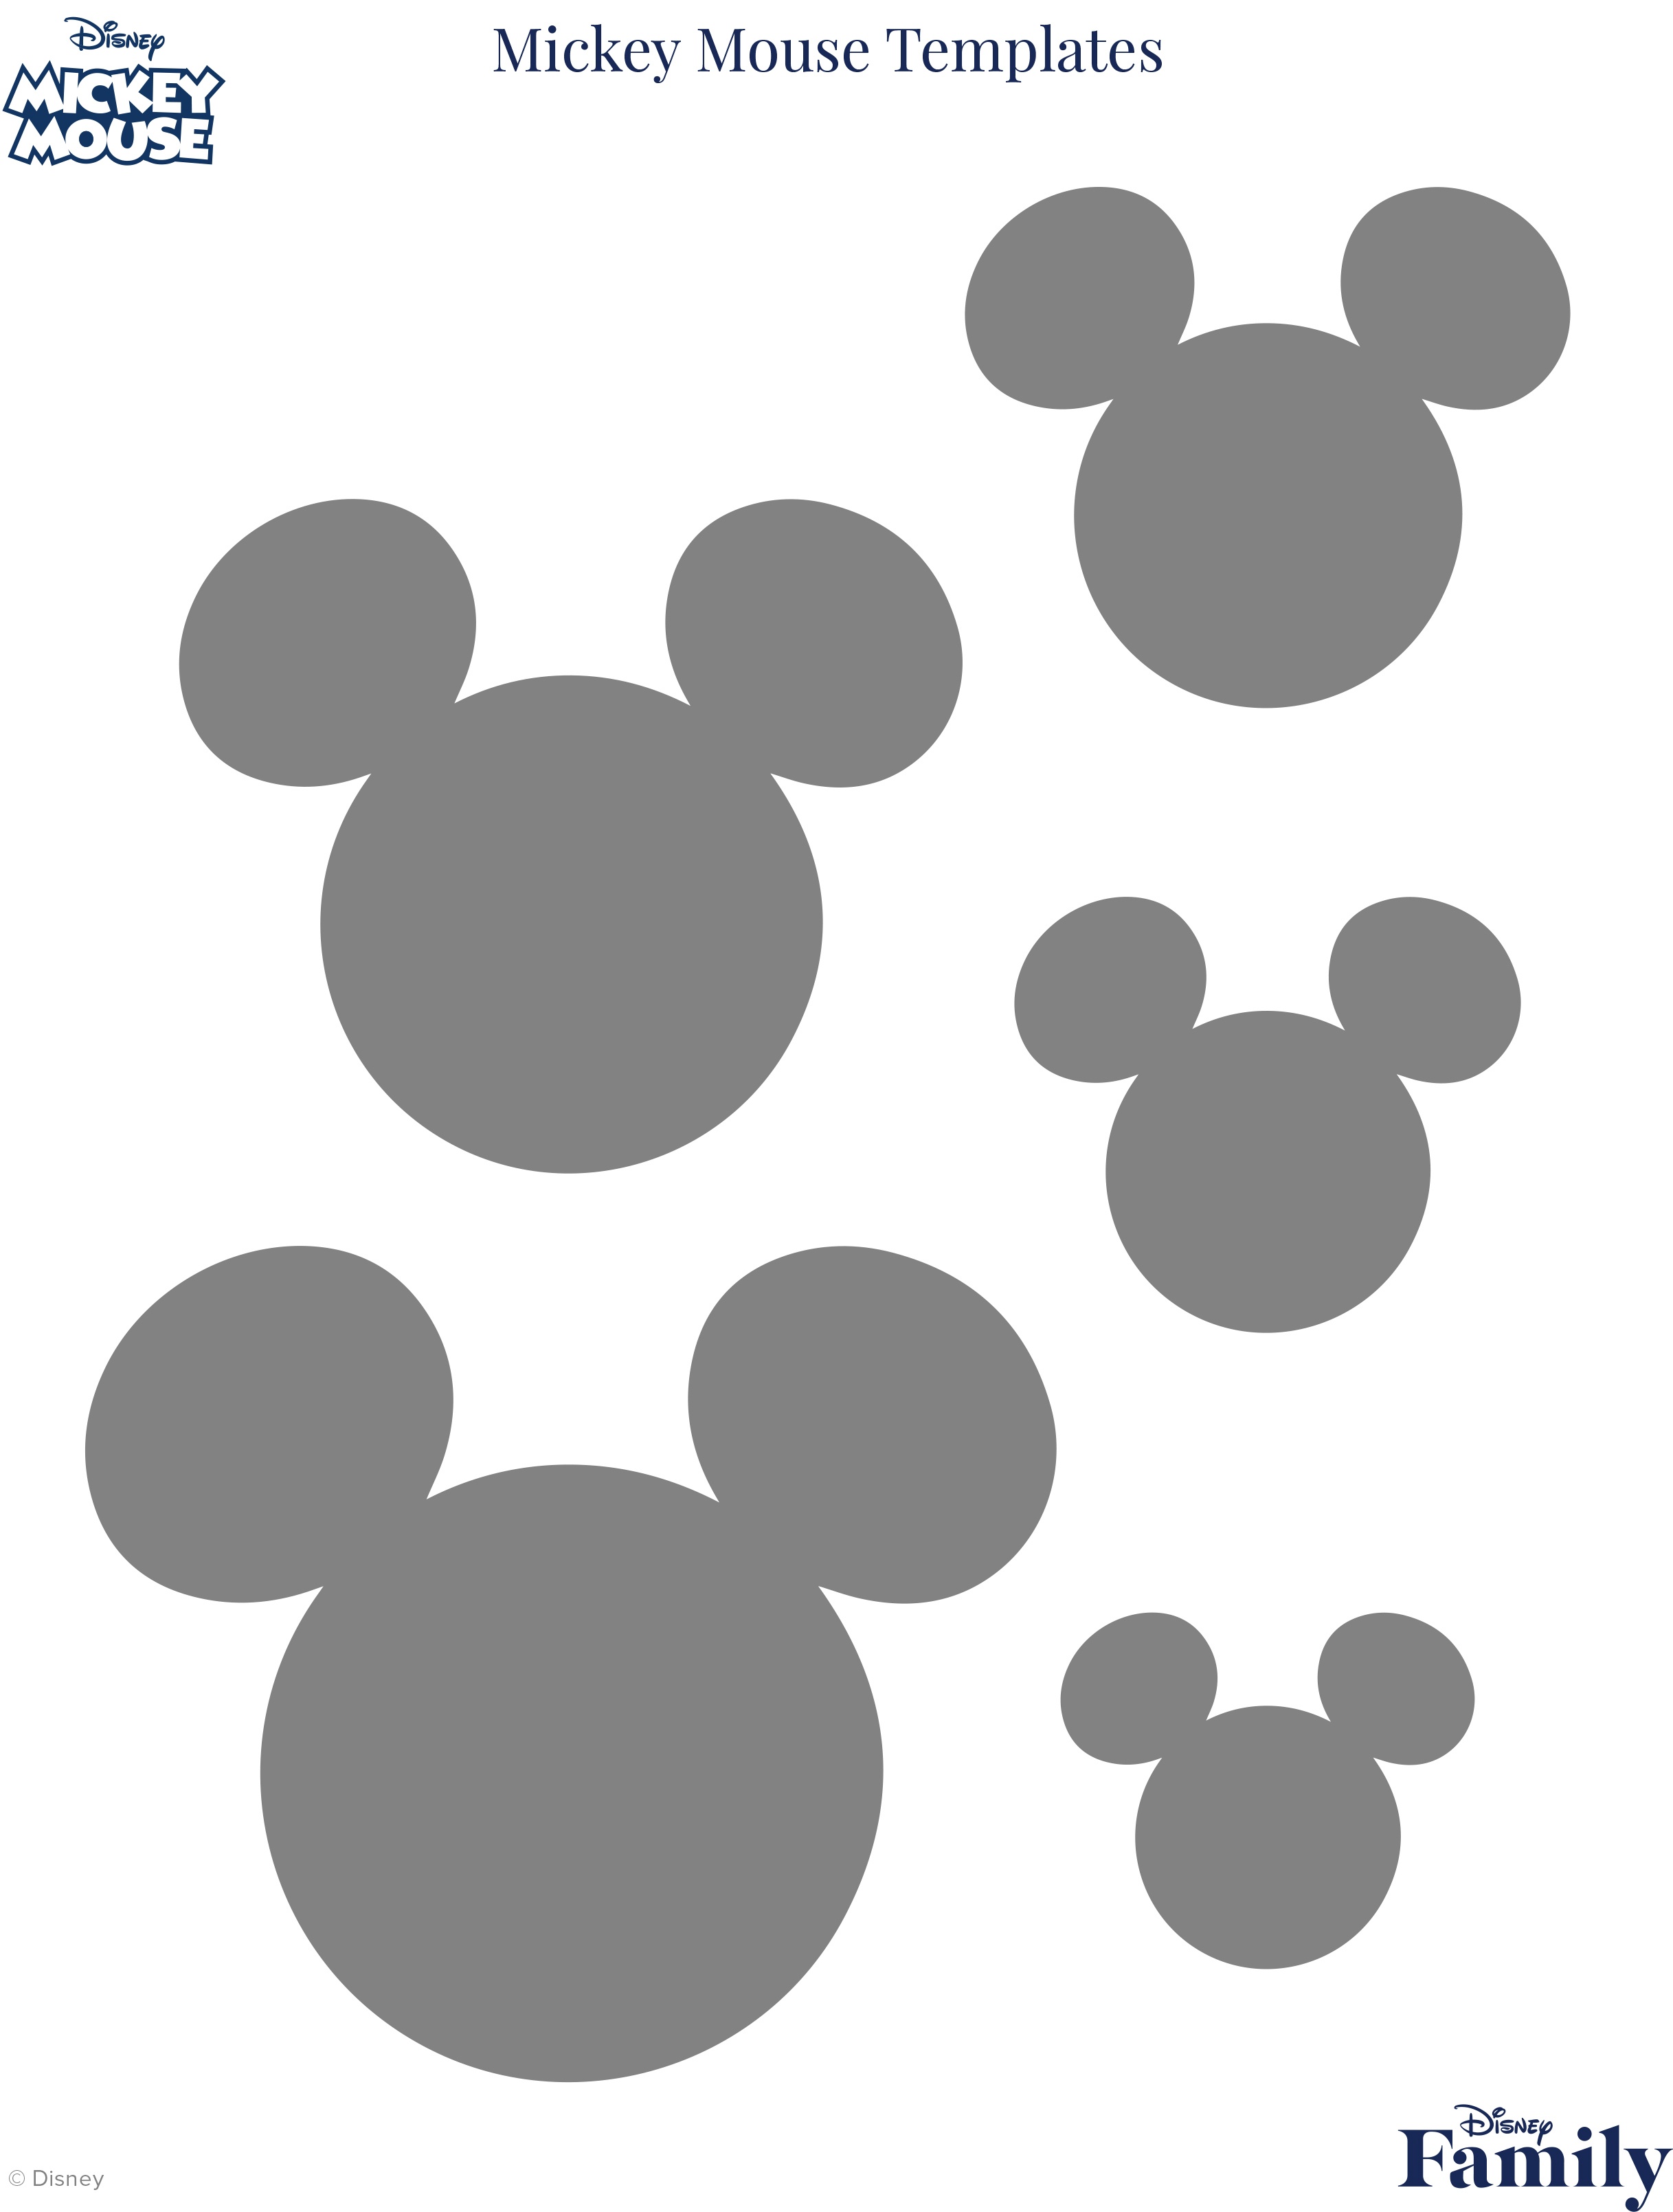 Mickey Mouse Template | Disney Family - Free Printable Disney Font Stencils